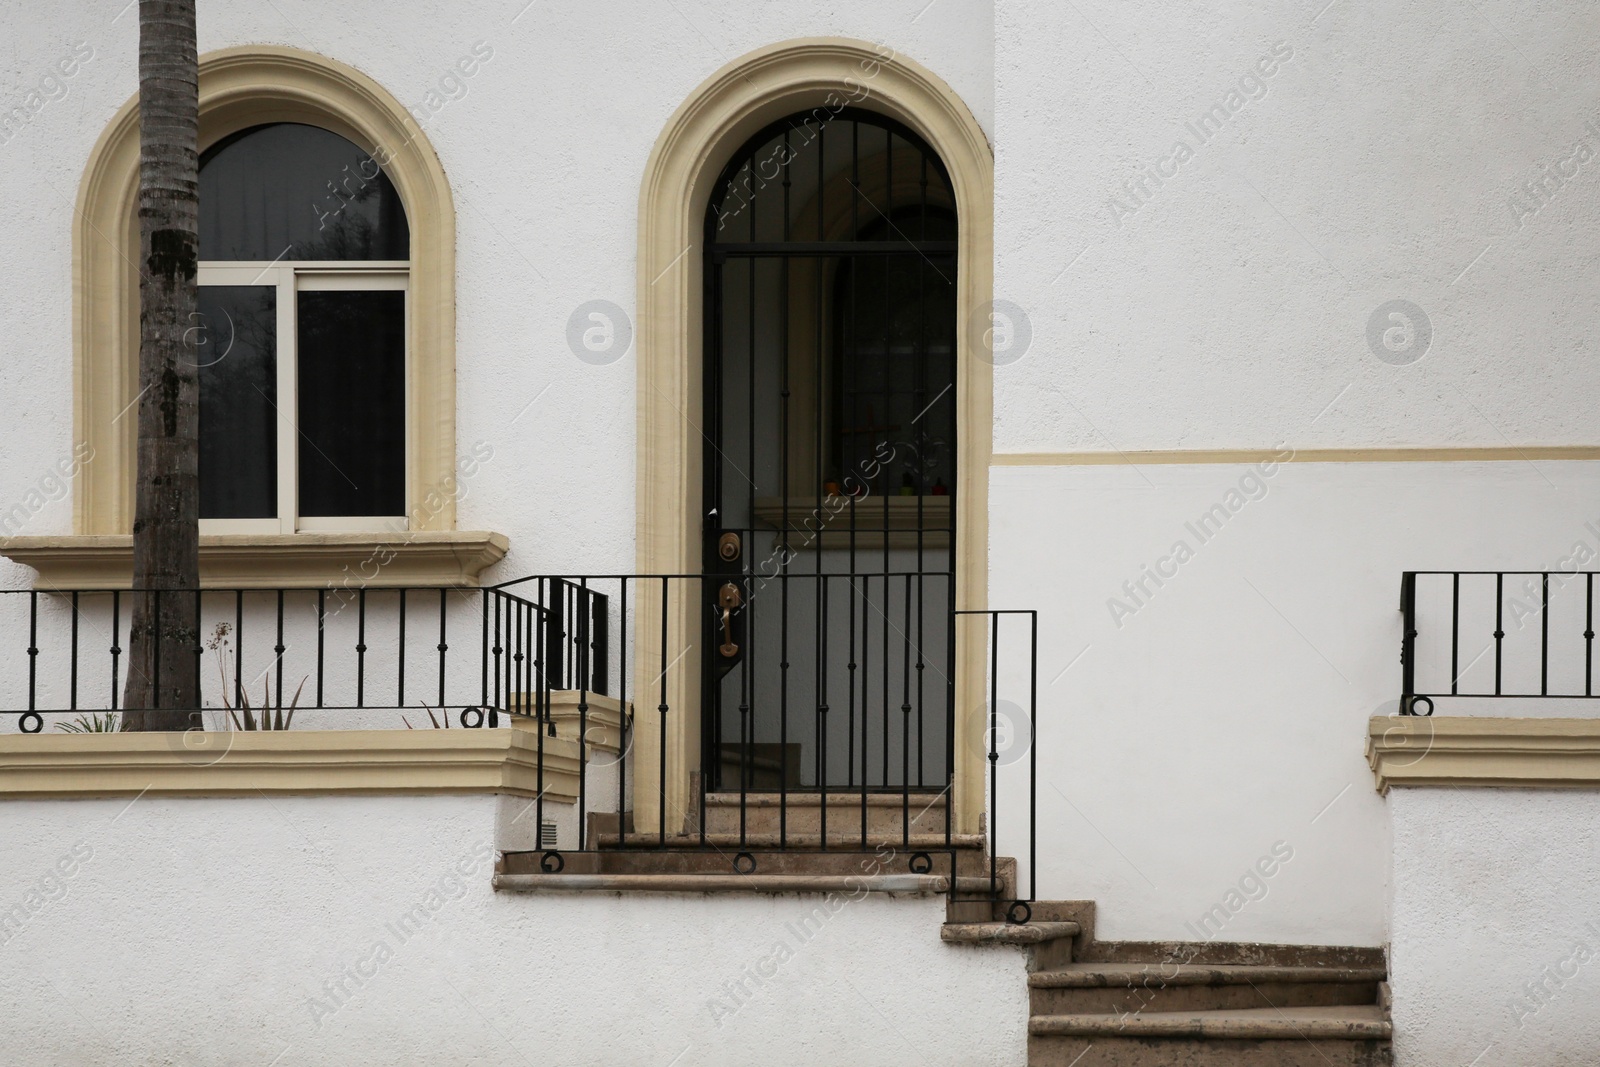 Photo of Entrance of residential house with door, potted plants and window